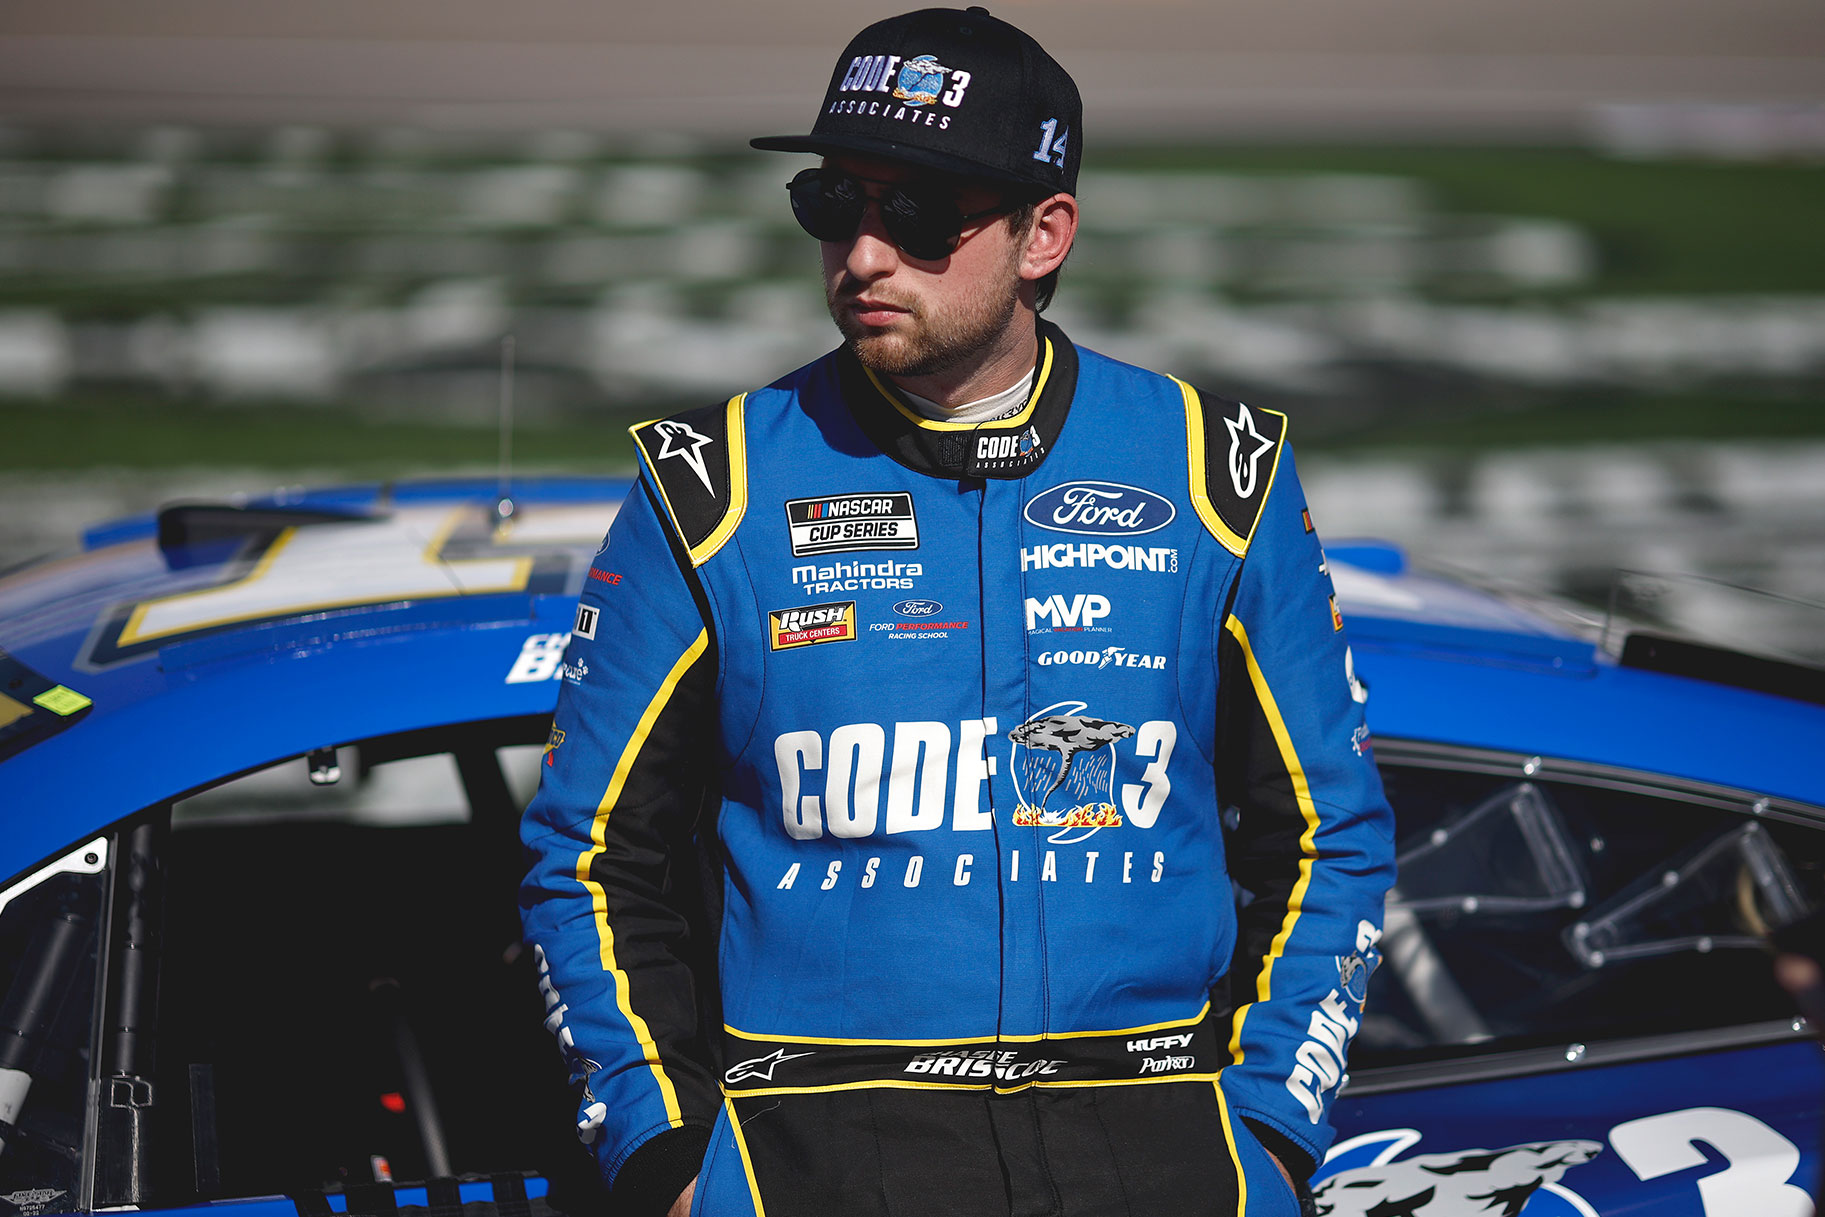 Chase Briscoe, driver of the #14 Ford Code 3 Associates Ford, waits on the grid during qualifying for the NASCAR Cup Series South Point 400